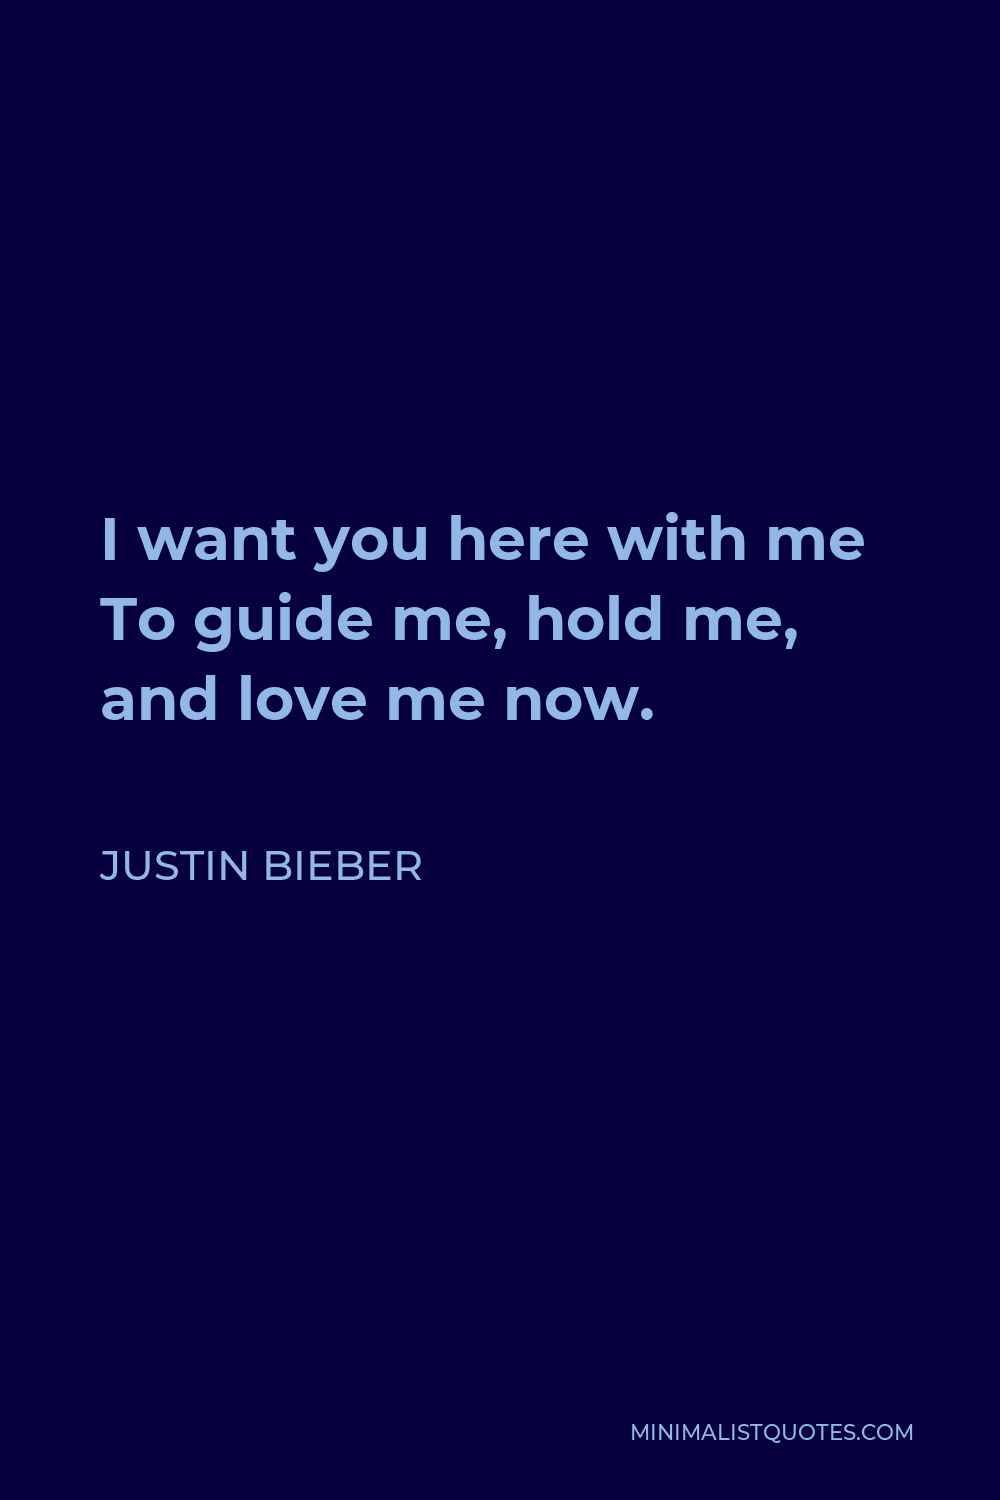 Justin Bieber Quote - I want you here with me To guide me, hold me, and love me now.